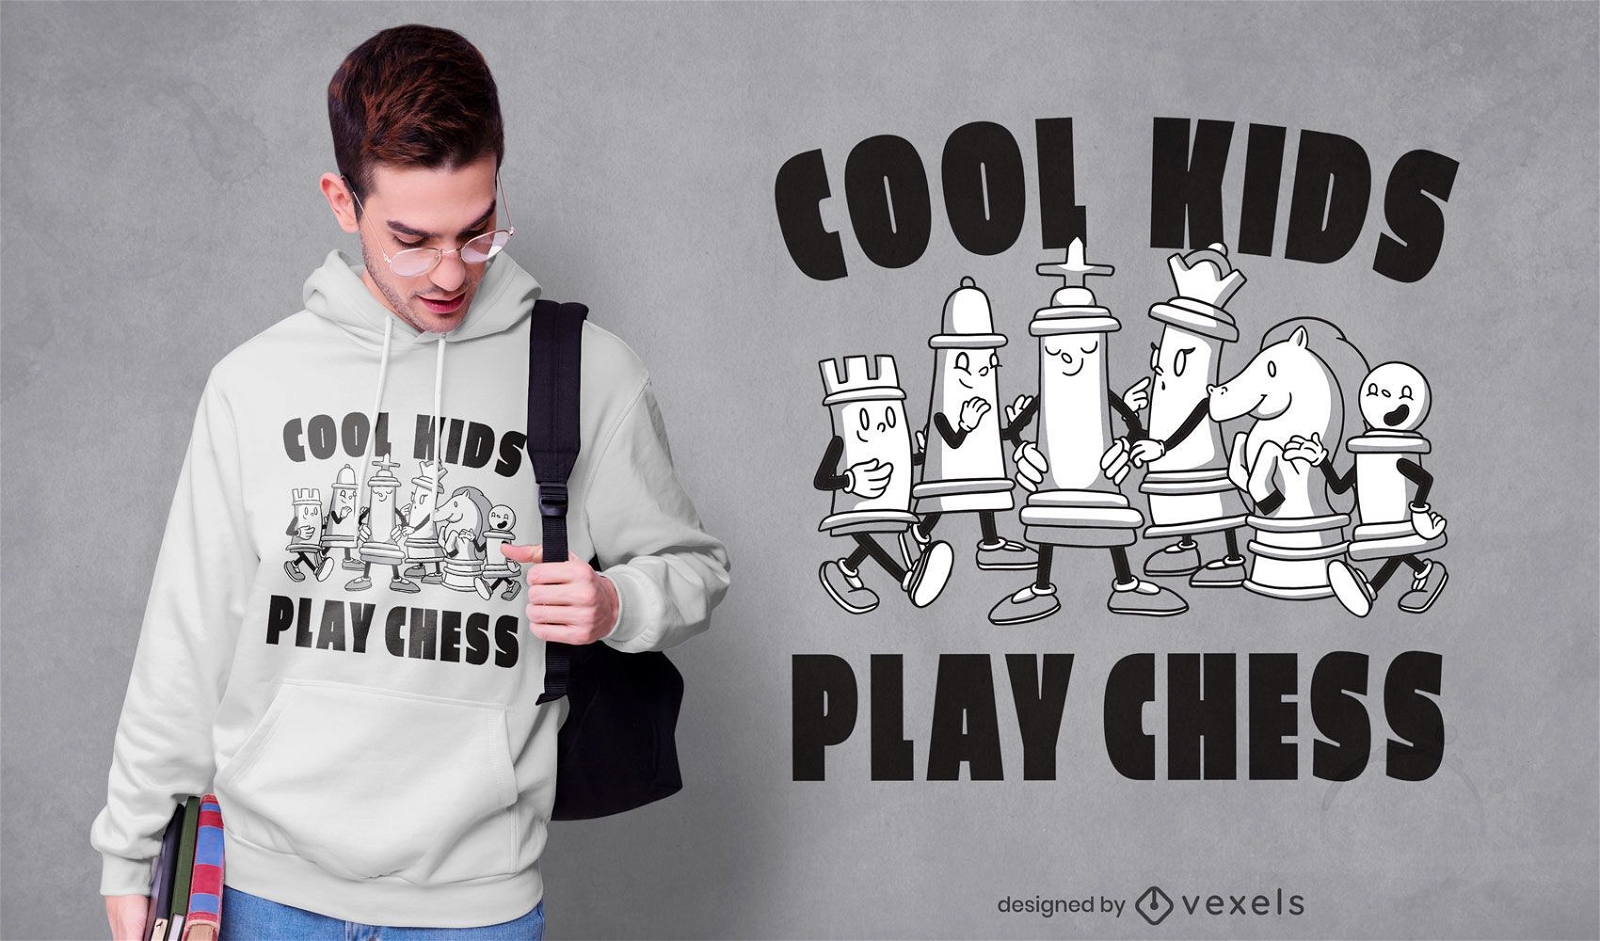 Black King The Most Powerful Piece In The Game Funny Chess T-Shirt